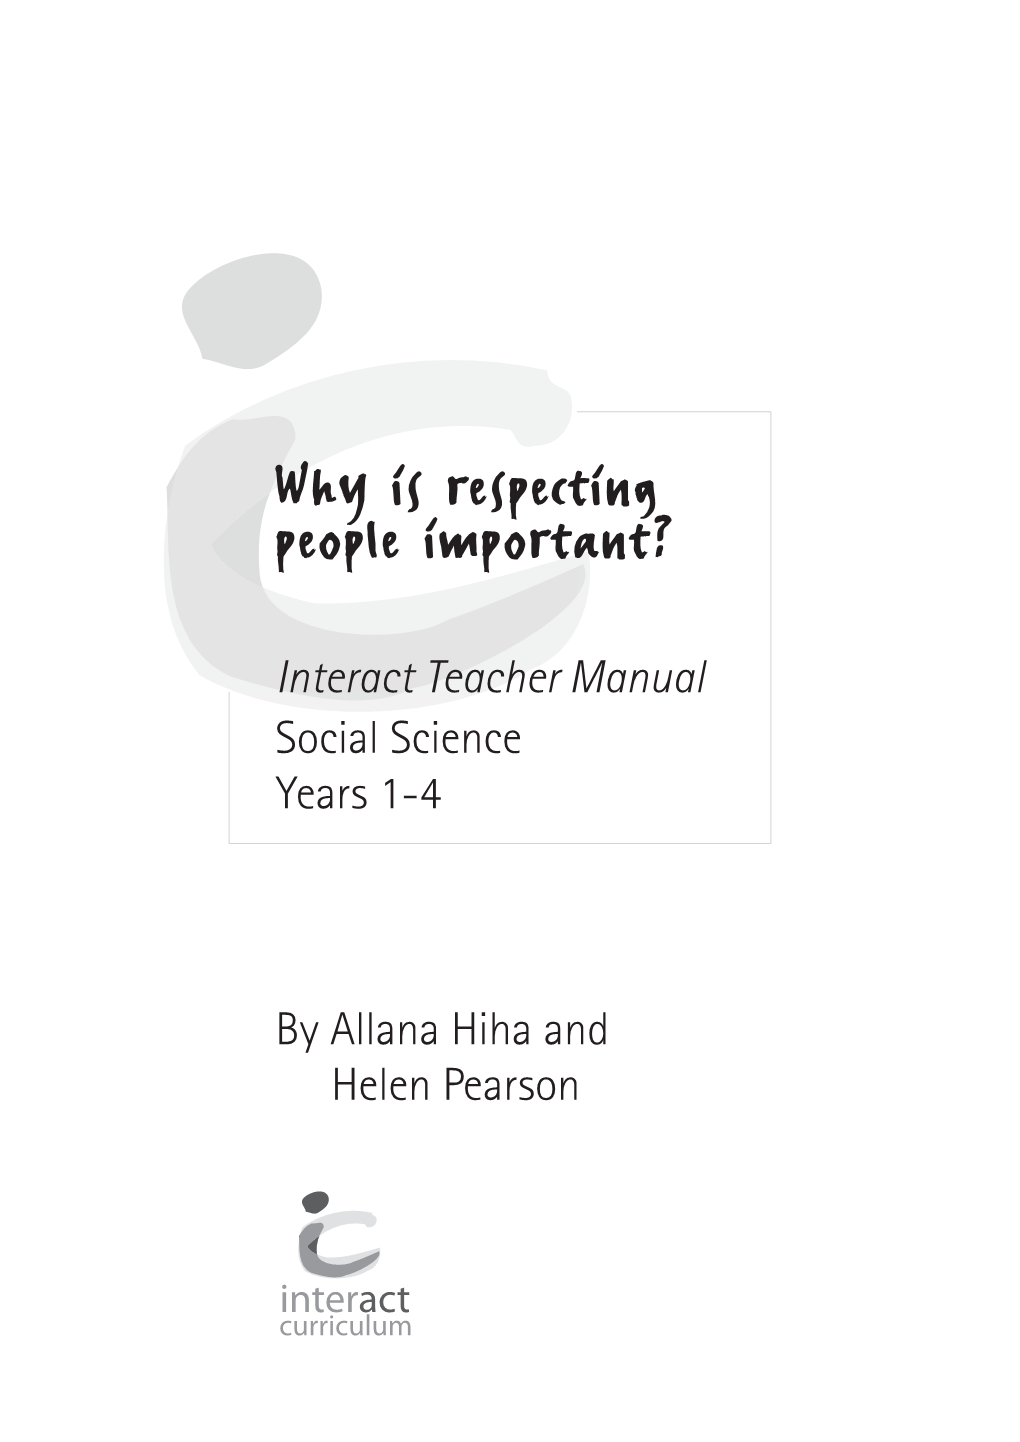 Why Is Respecting People Important?